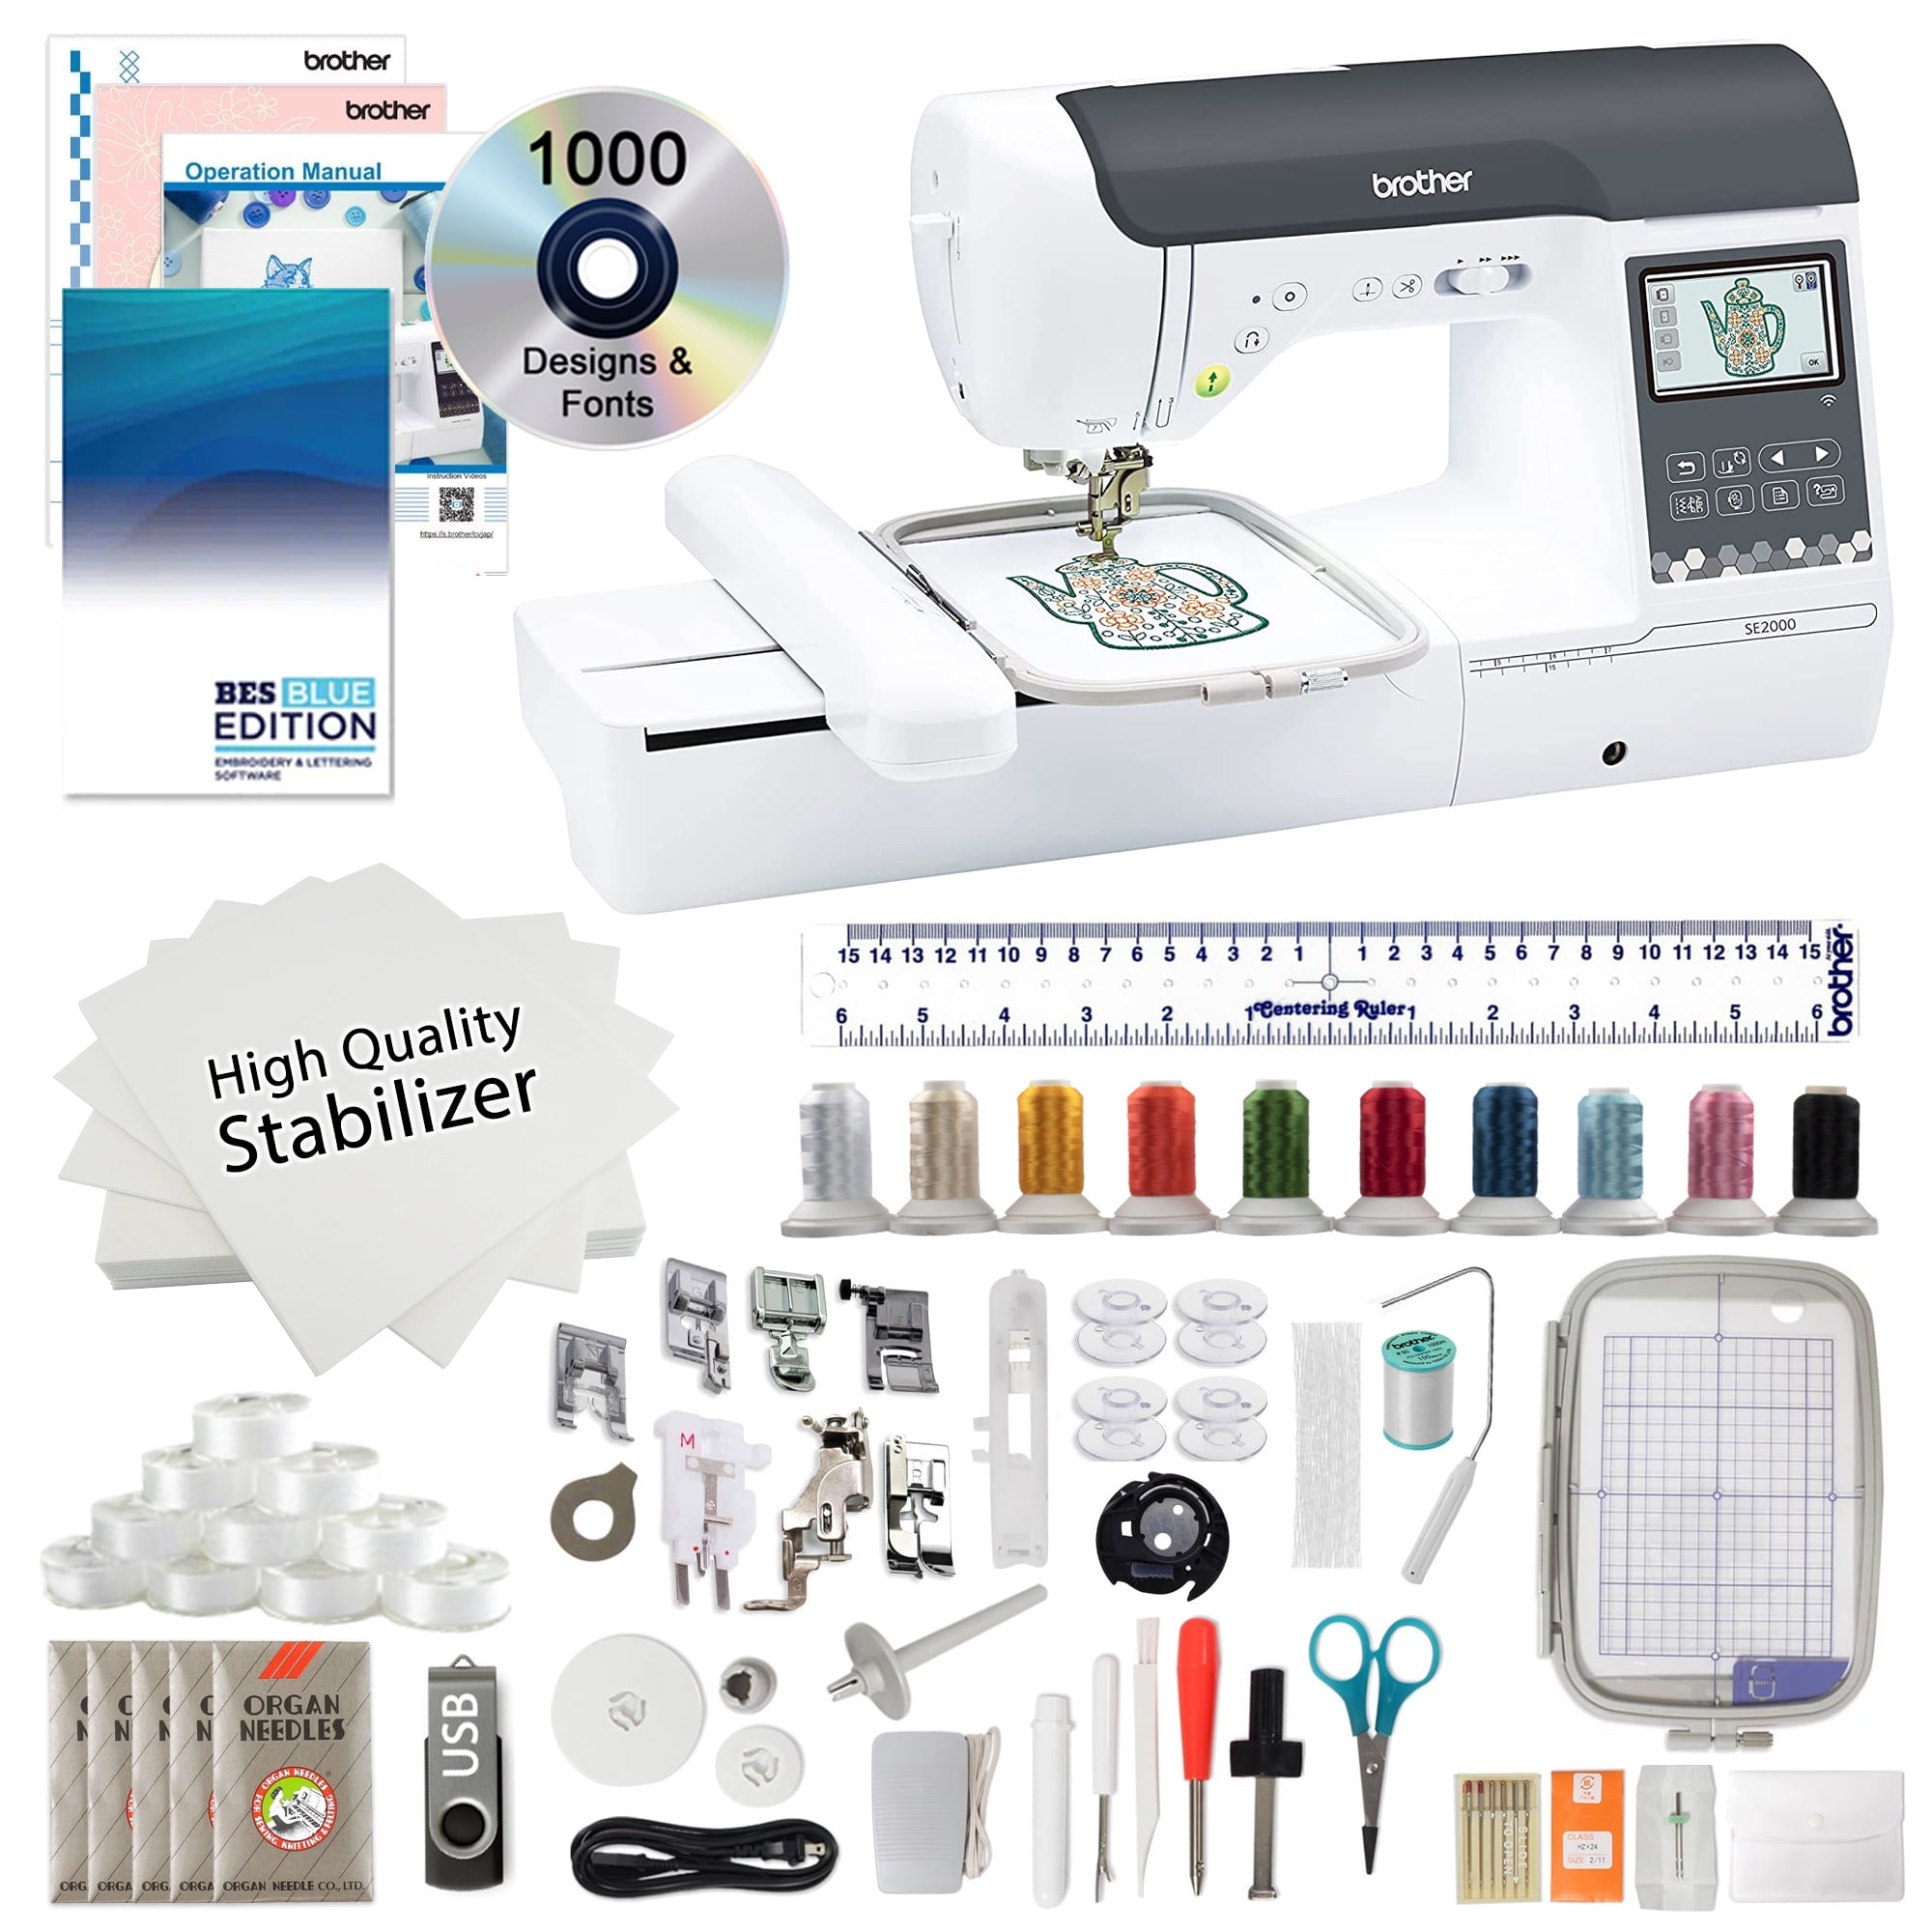 Buy Brother SE2000 Sewing + Embroidery Machine, 5 x 7 Field, Cuts Jump  Stitches, Wireless, Includes Starter Package - 7 Spools of Polystar Thread,  10-Pack of Distinctive Bobbins + 1GB USB Drive